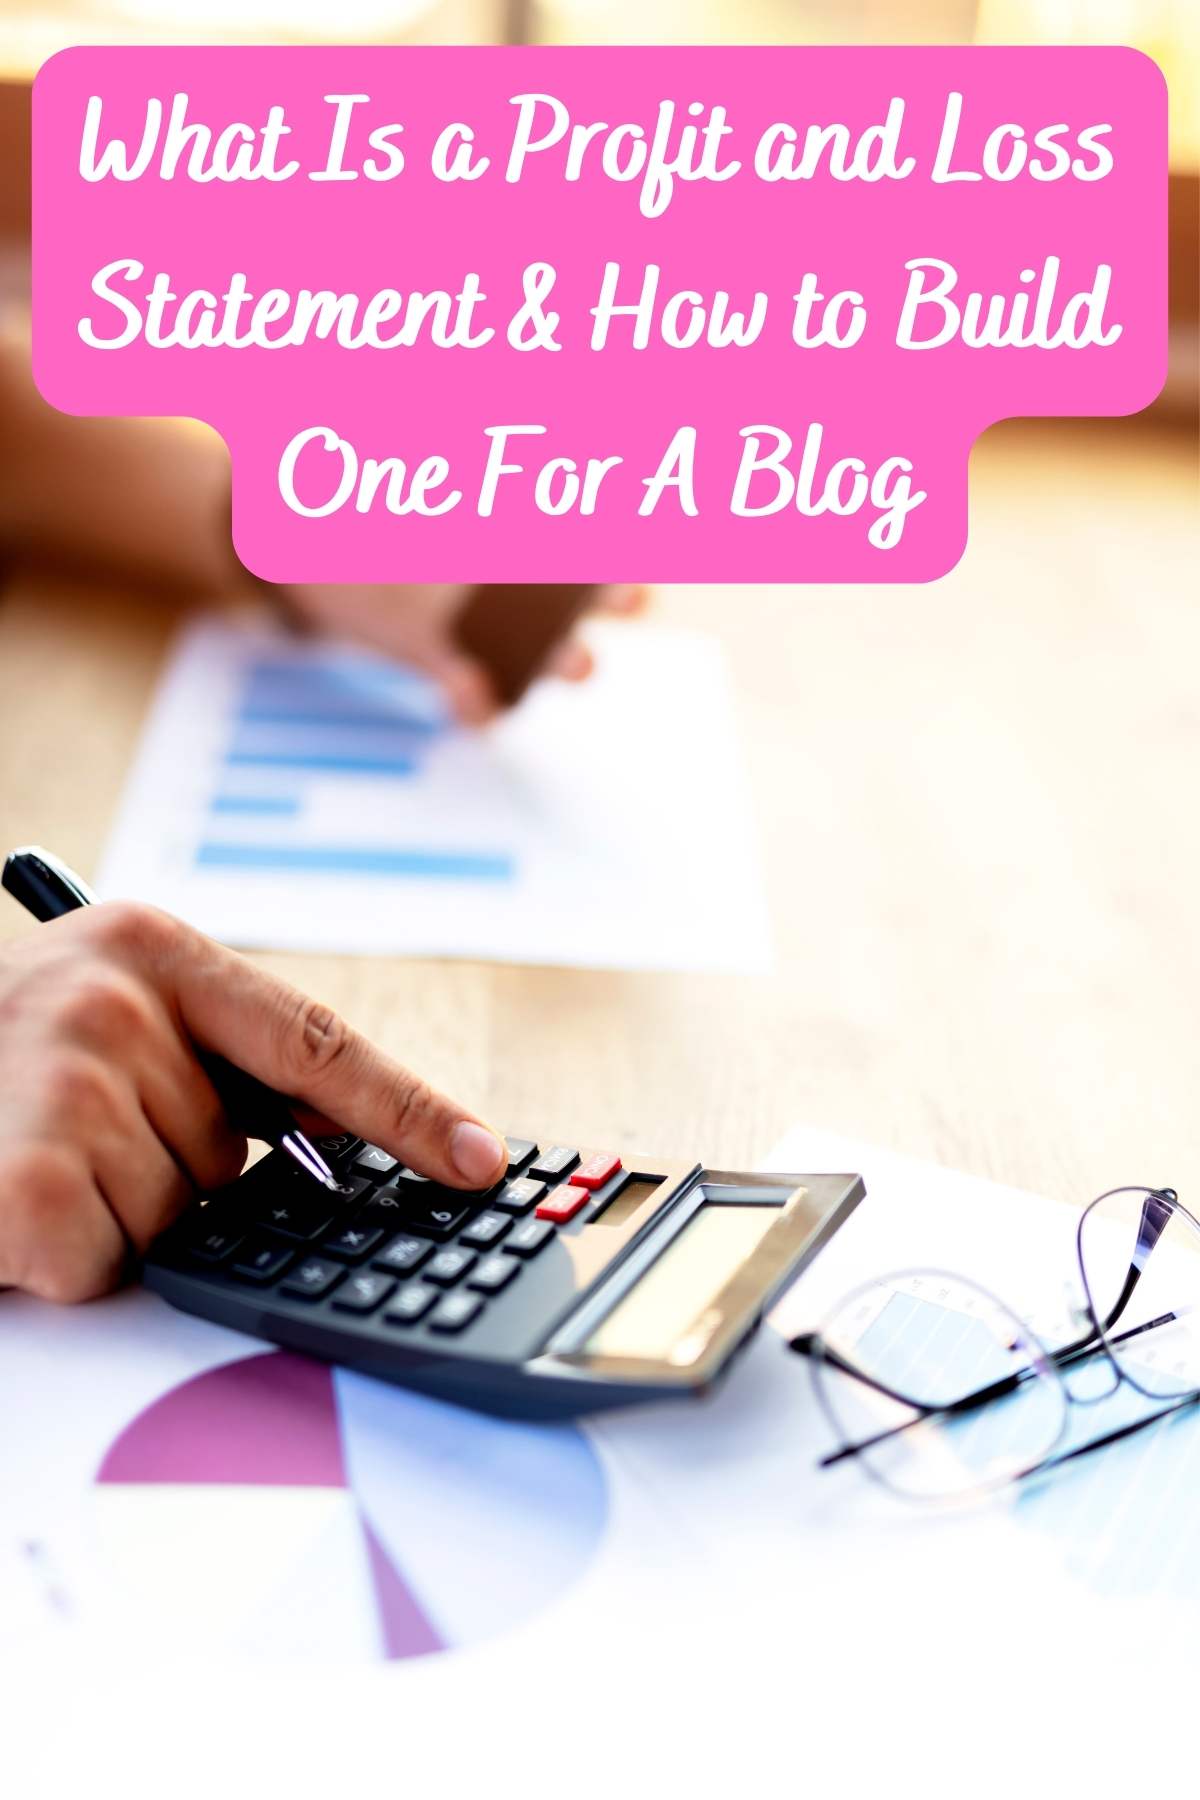 What is a profit and loss statement & how to build one for a blog.